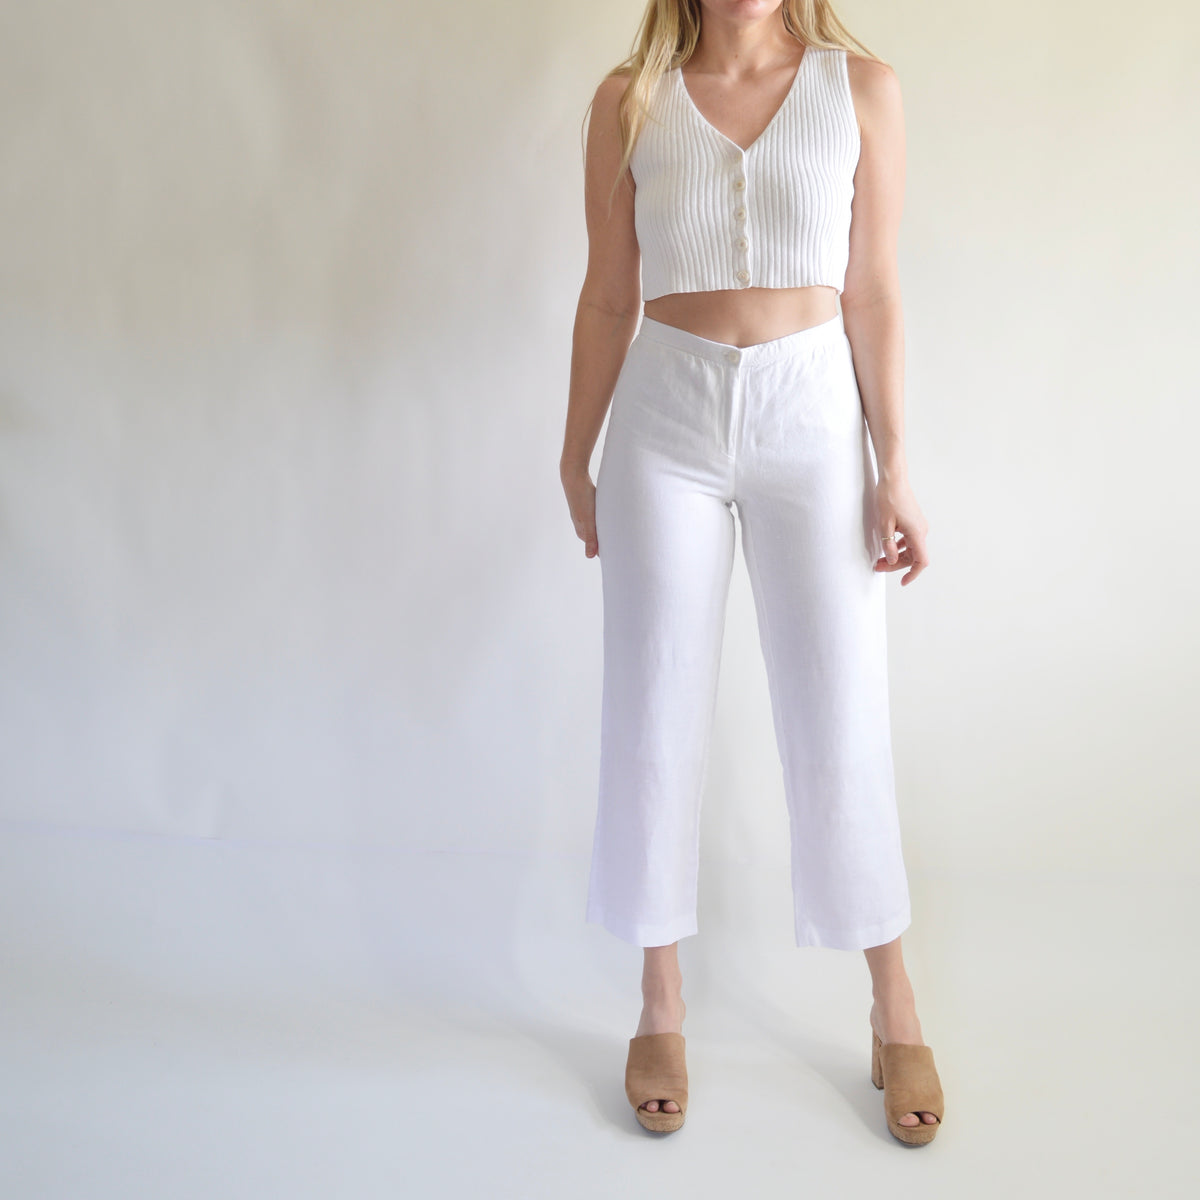 pants – shop state and plain